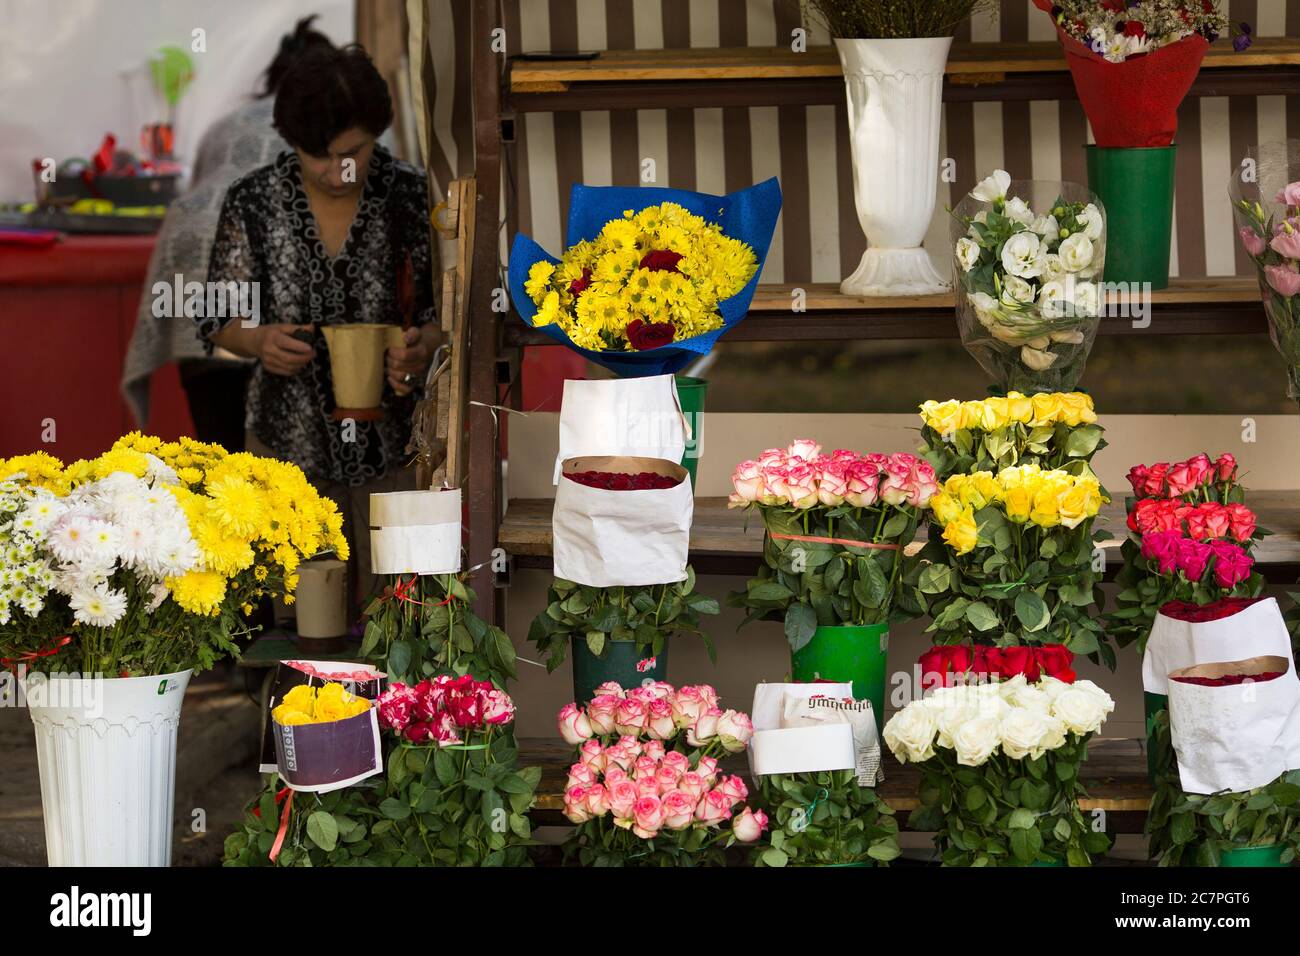 A flower store holder prepares for the weekend trade early on a Sunday morning in Yerevan, Armenia. Stock Photo